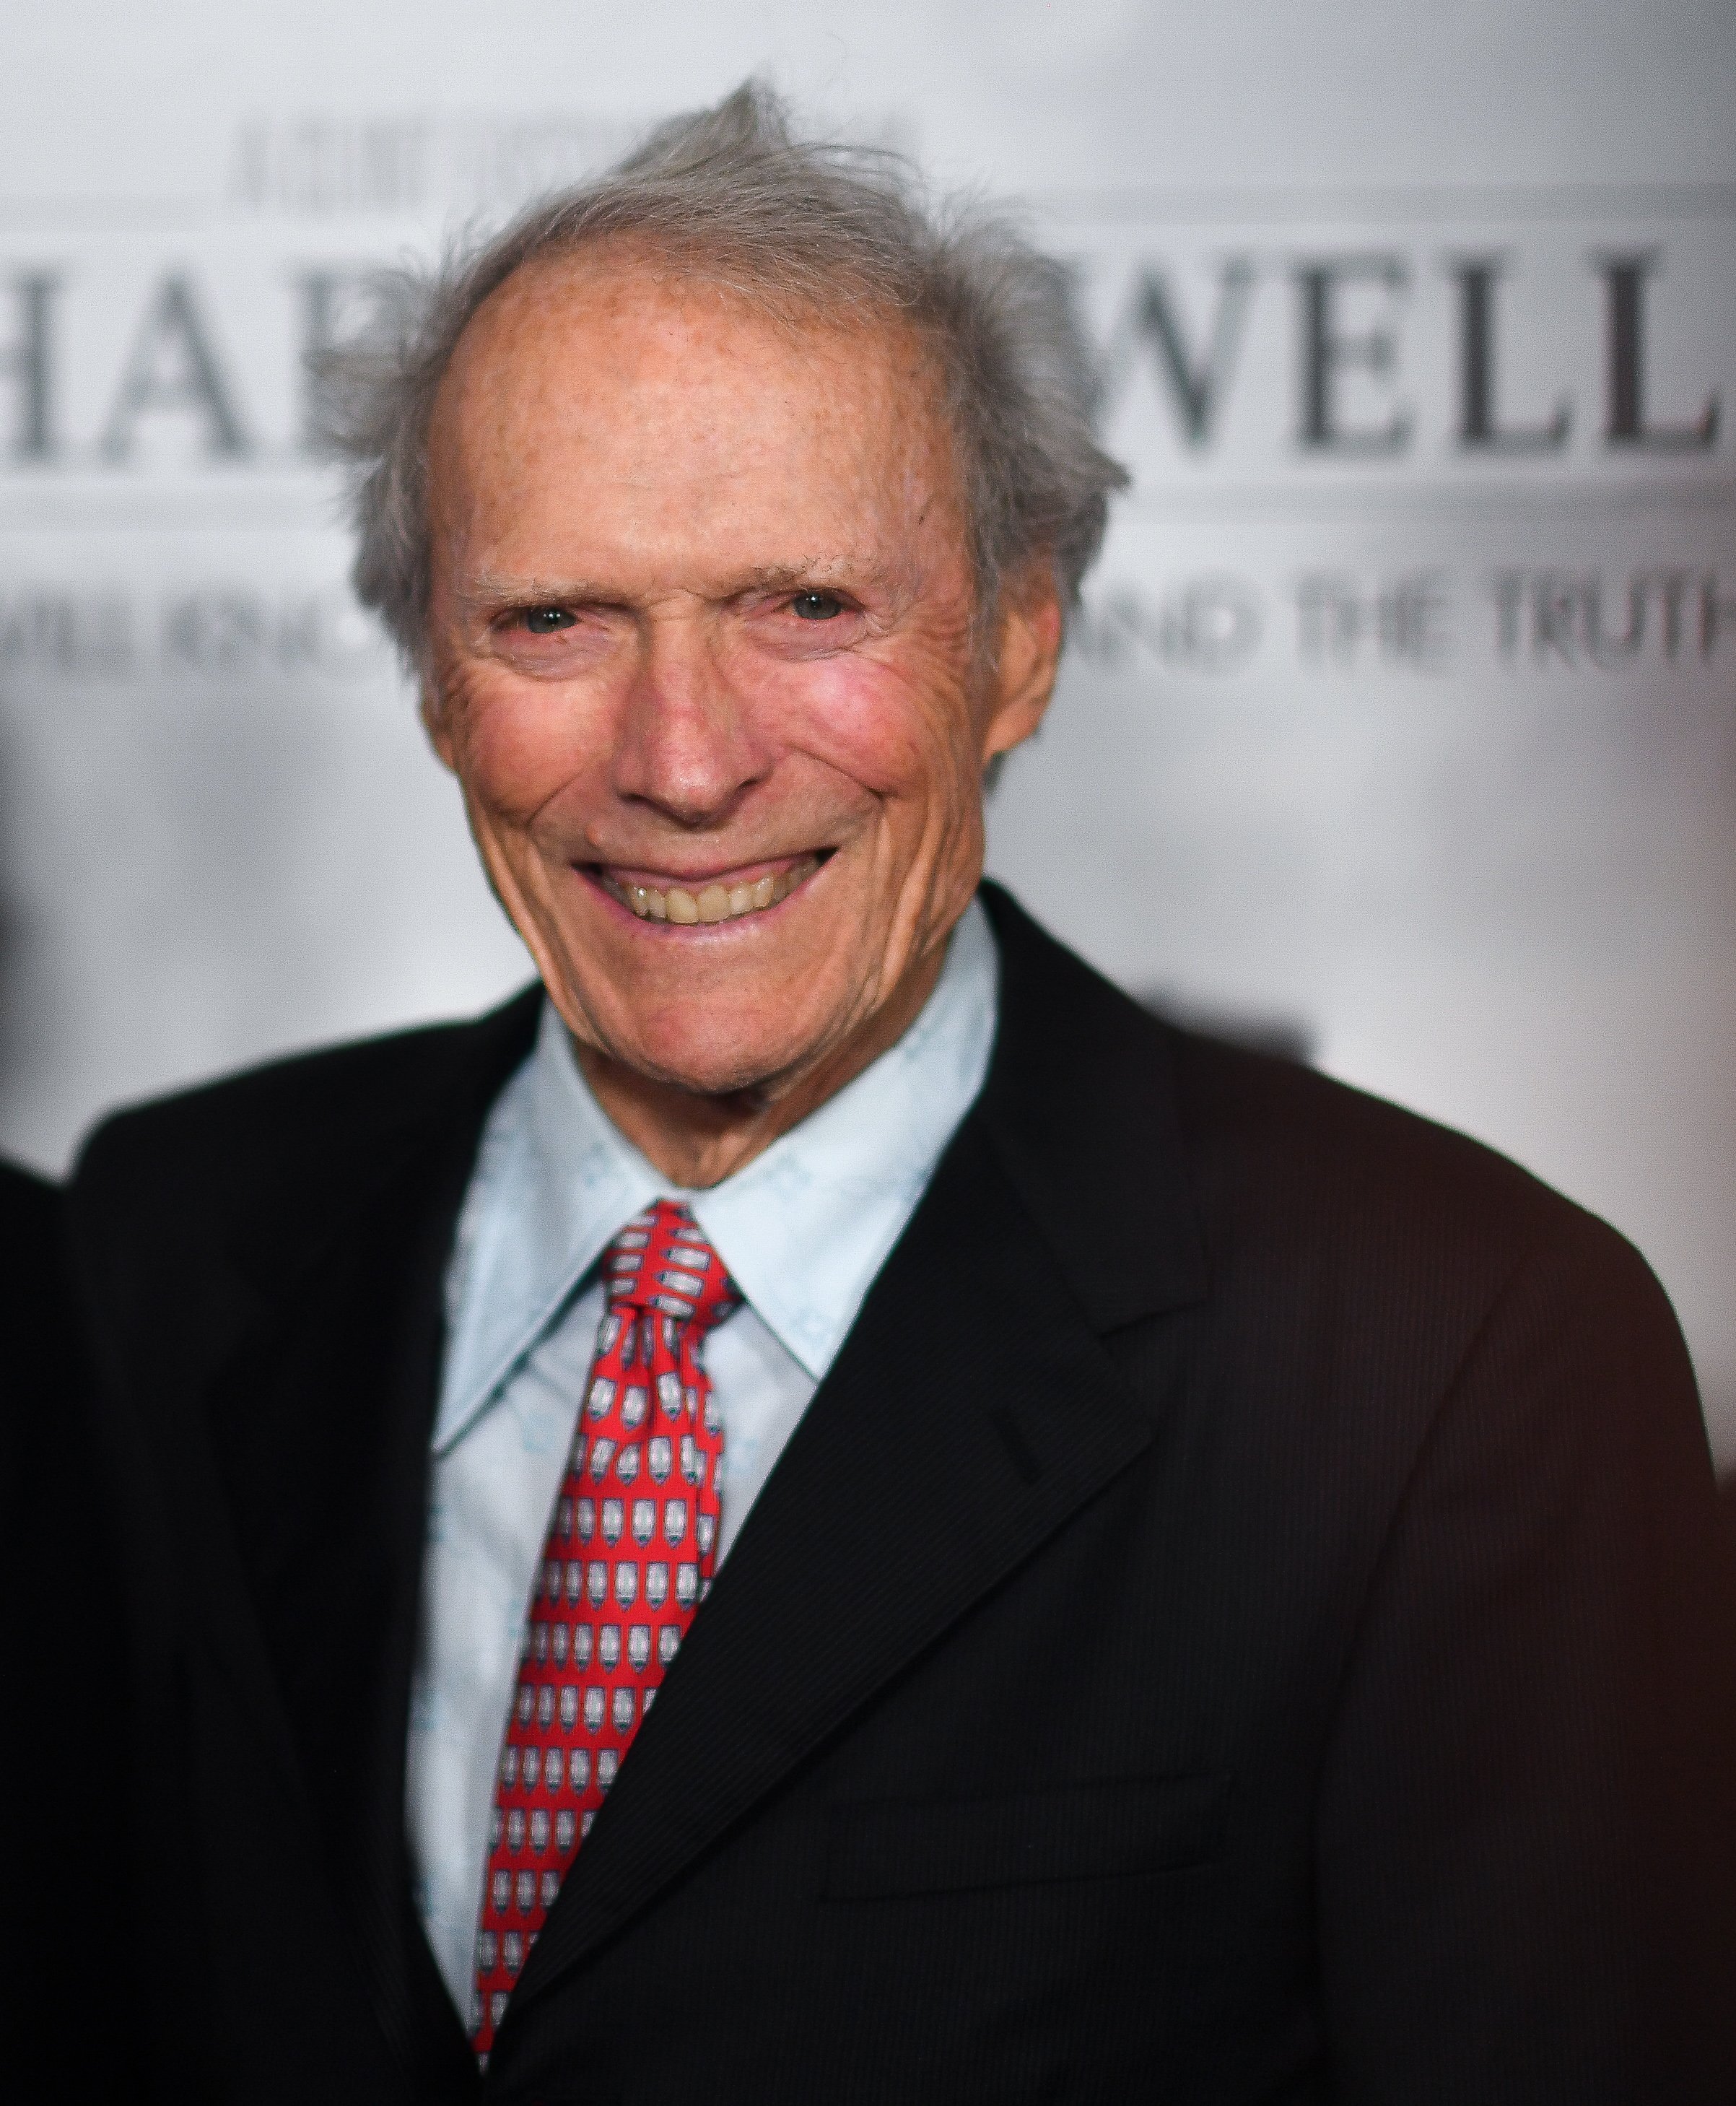 Clint Eastwood attends the "Richard Jewell" Atlanta Screening at Rialto Center of the Arts on December 10, 2019. | Photo: Getty Images